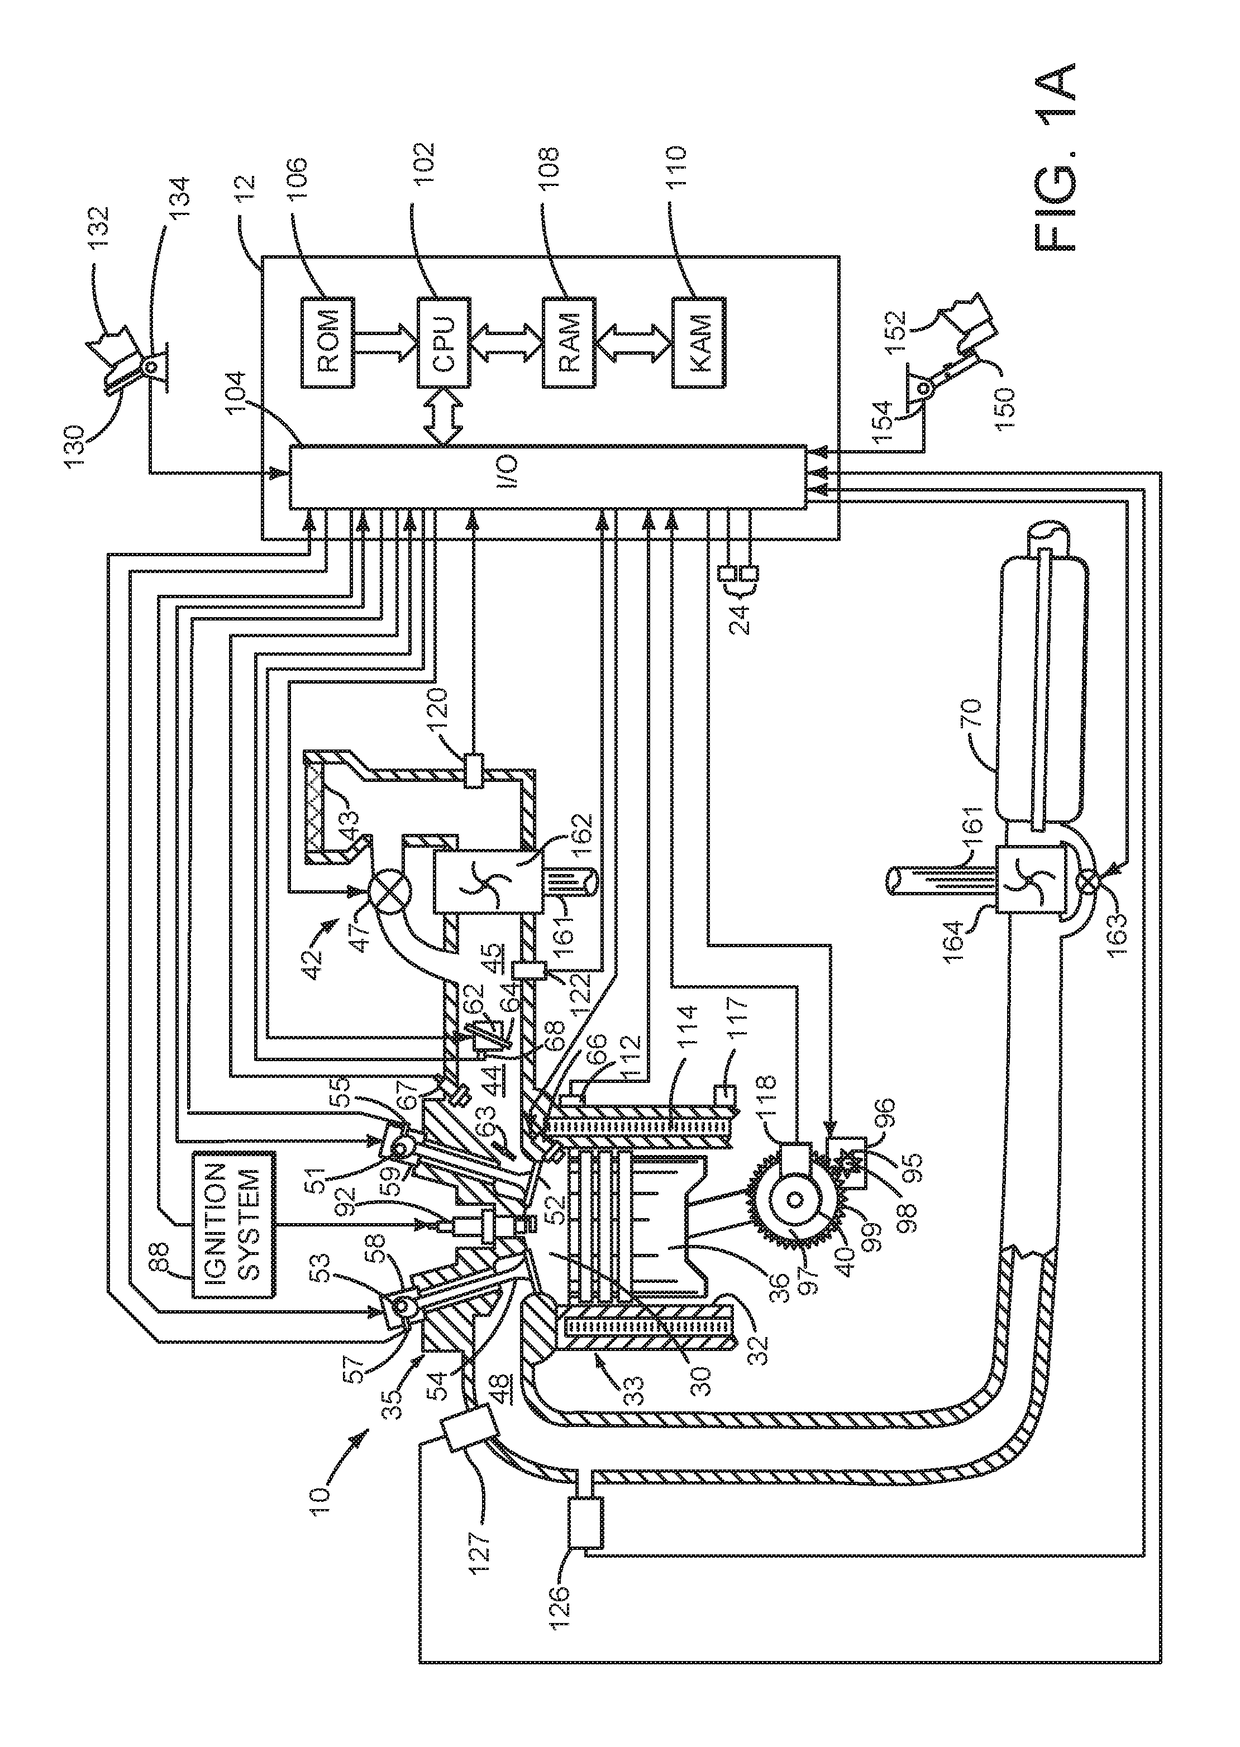 System and method for intake manifold pressure control